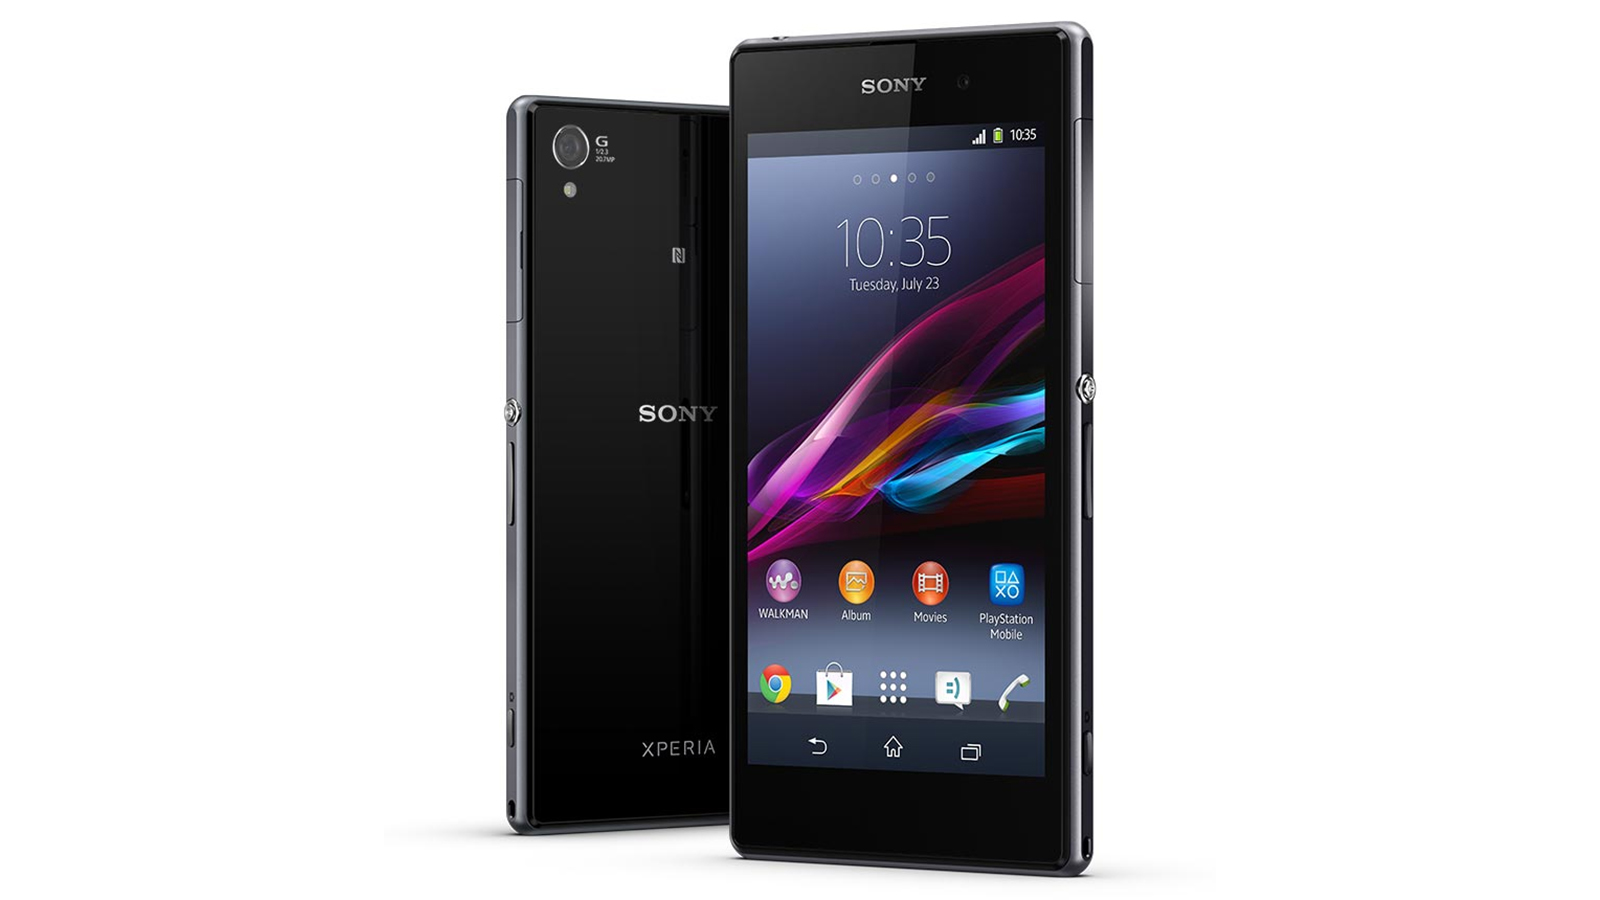 Sony smartphones a complete history of Xperia flagship phones ahead of